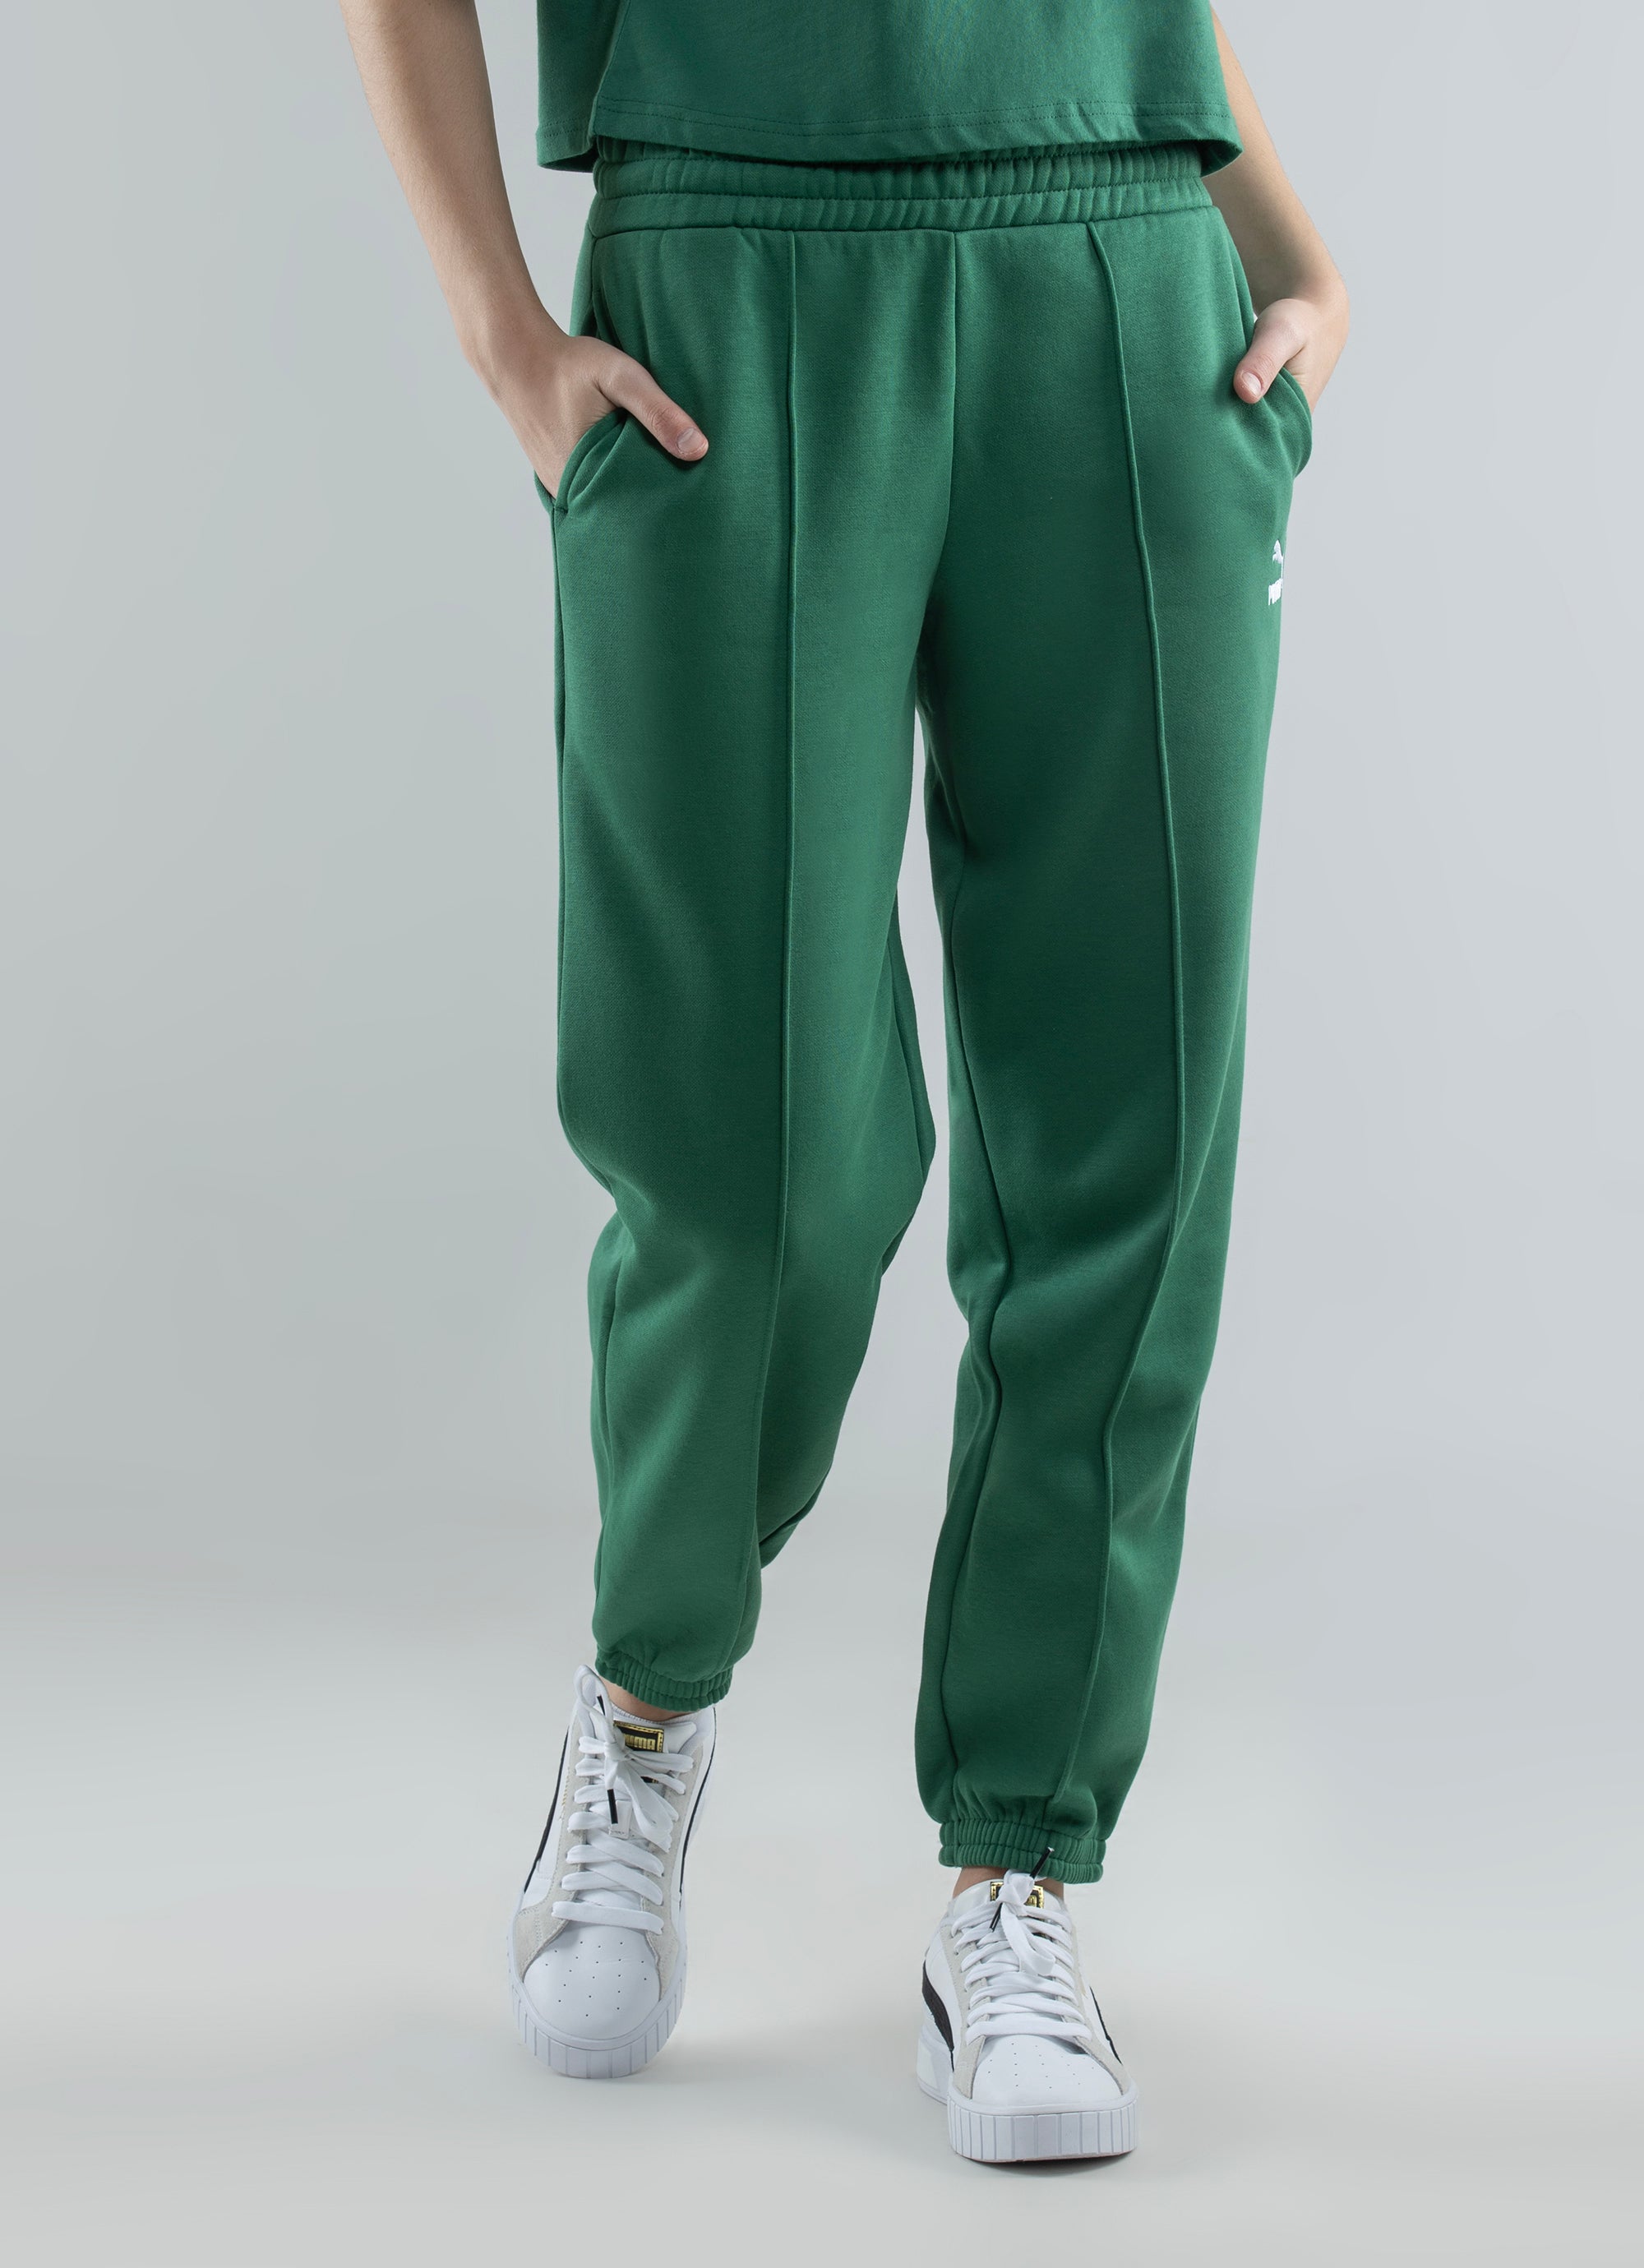 Lacoste Women's Perforated Effect Track Pants XF5889 DBF | lacoste.pl |  Zakupy Online